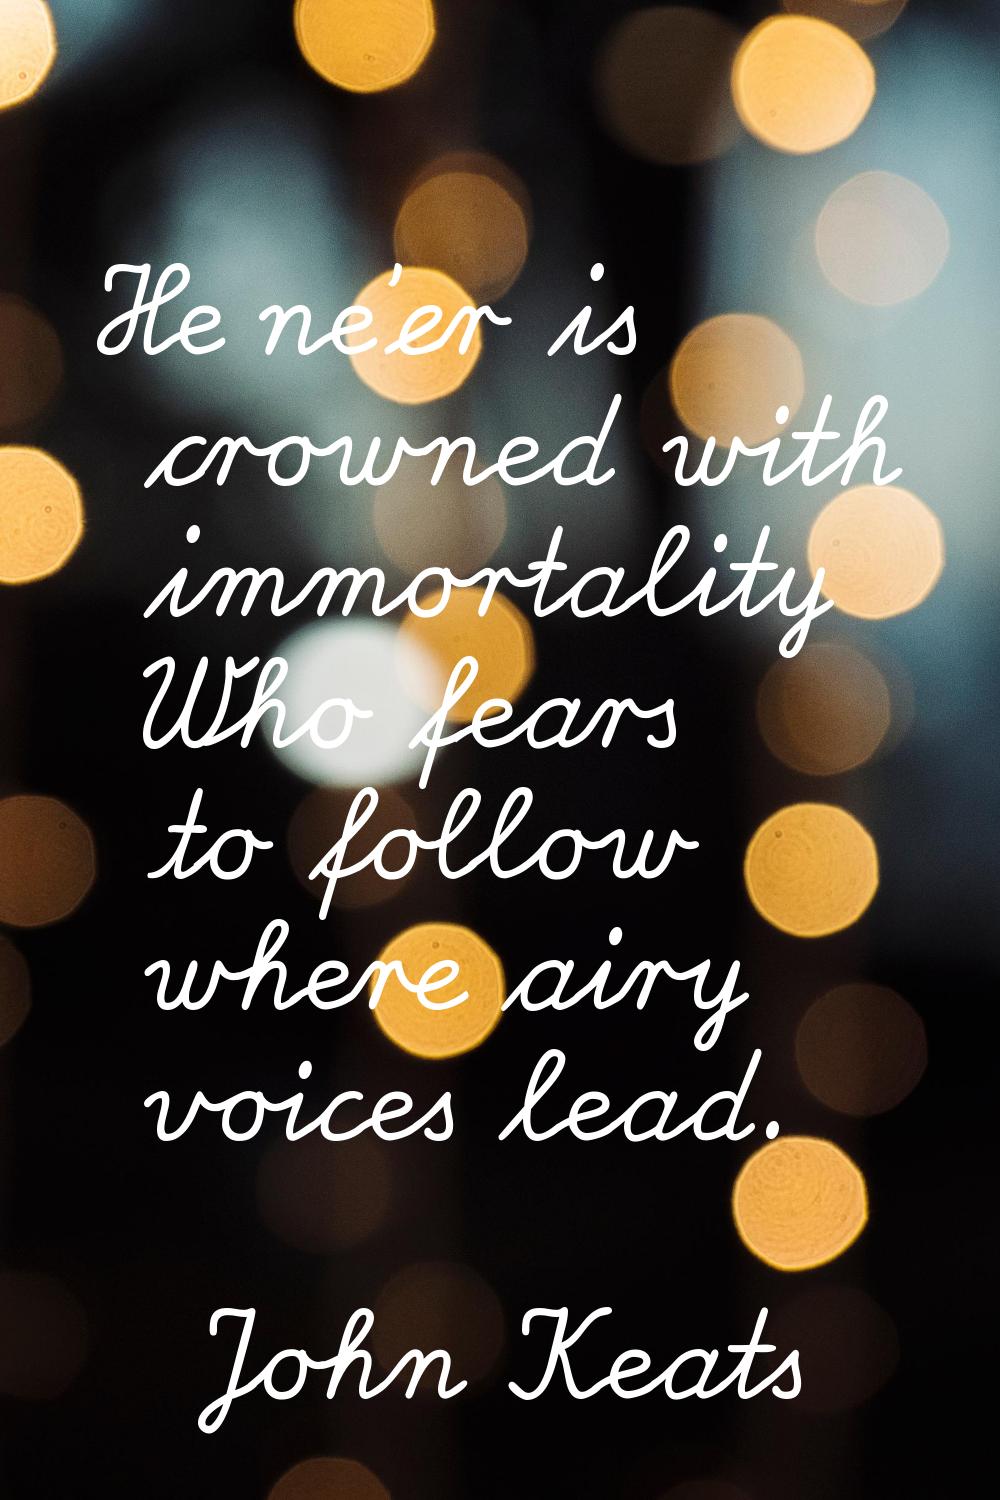 He ne'er is crowned with immortality Who fears to follow where airy voices lead.